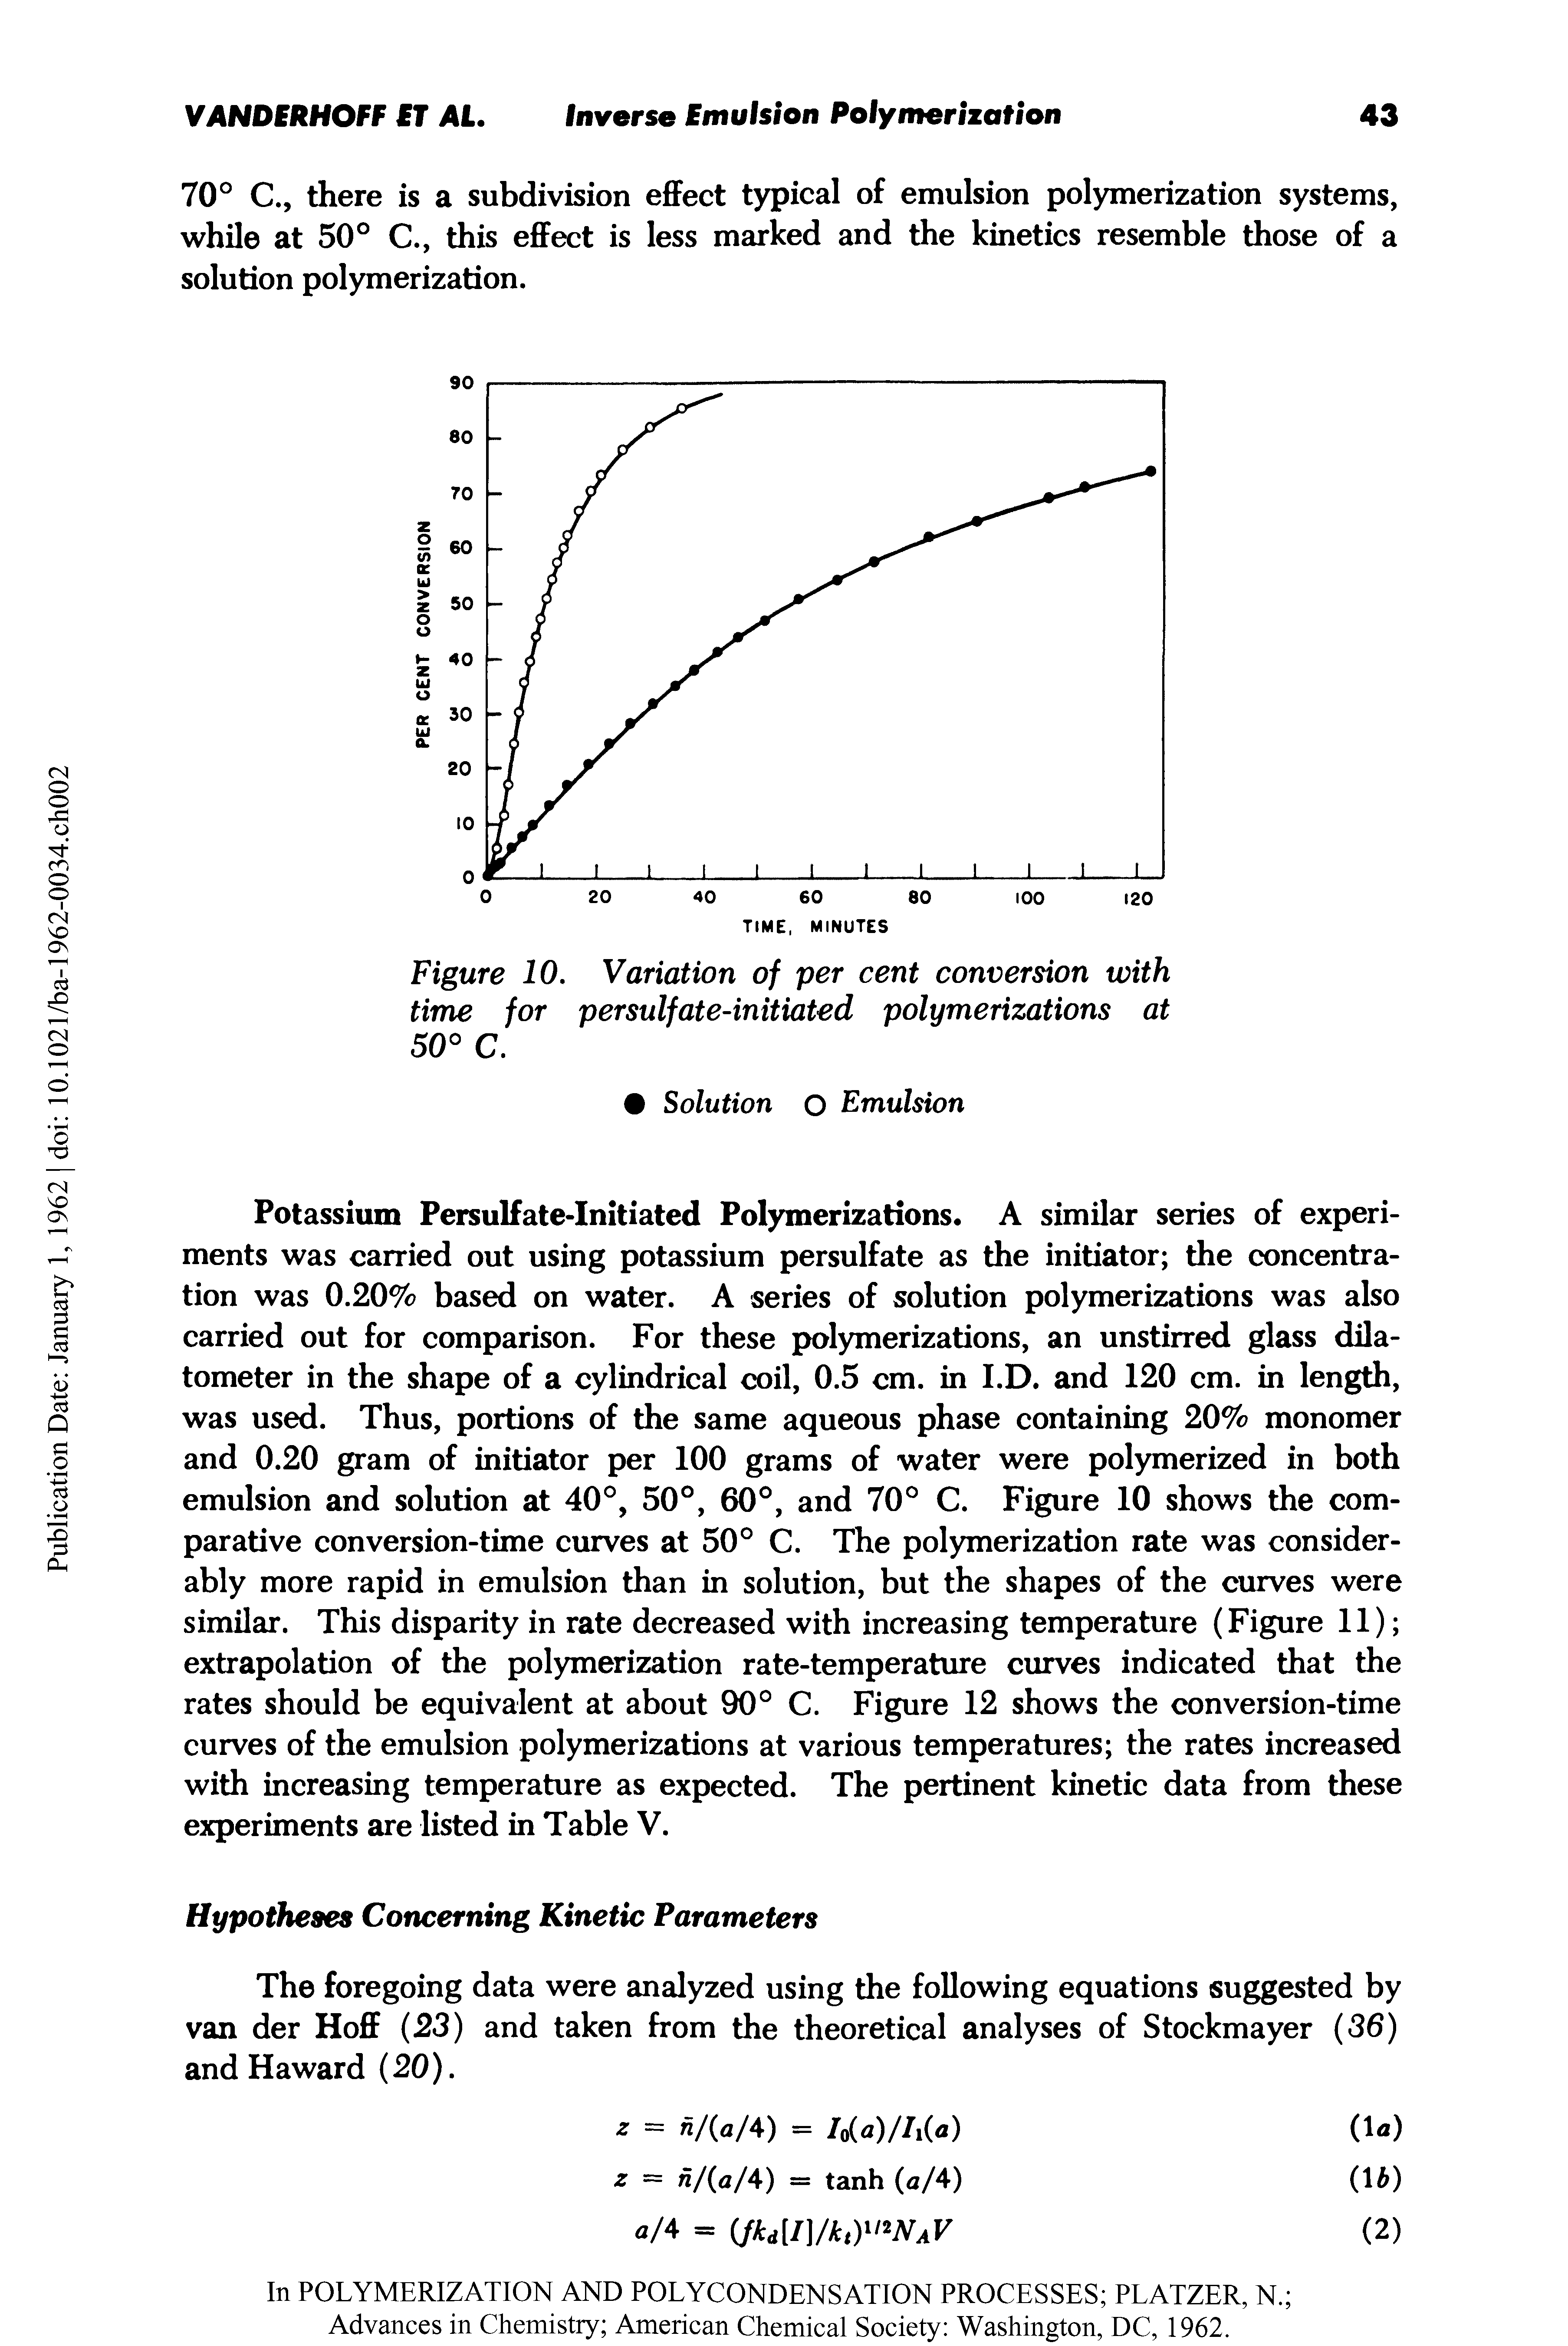 Figure 10. Variation of per cent conversion with time for persulfate-initiated polymerizations at 50° C.